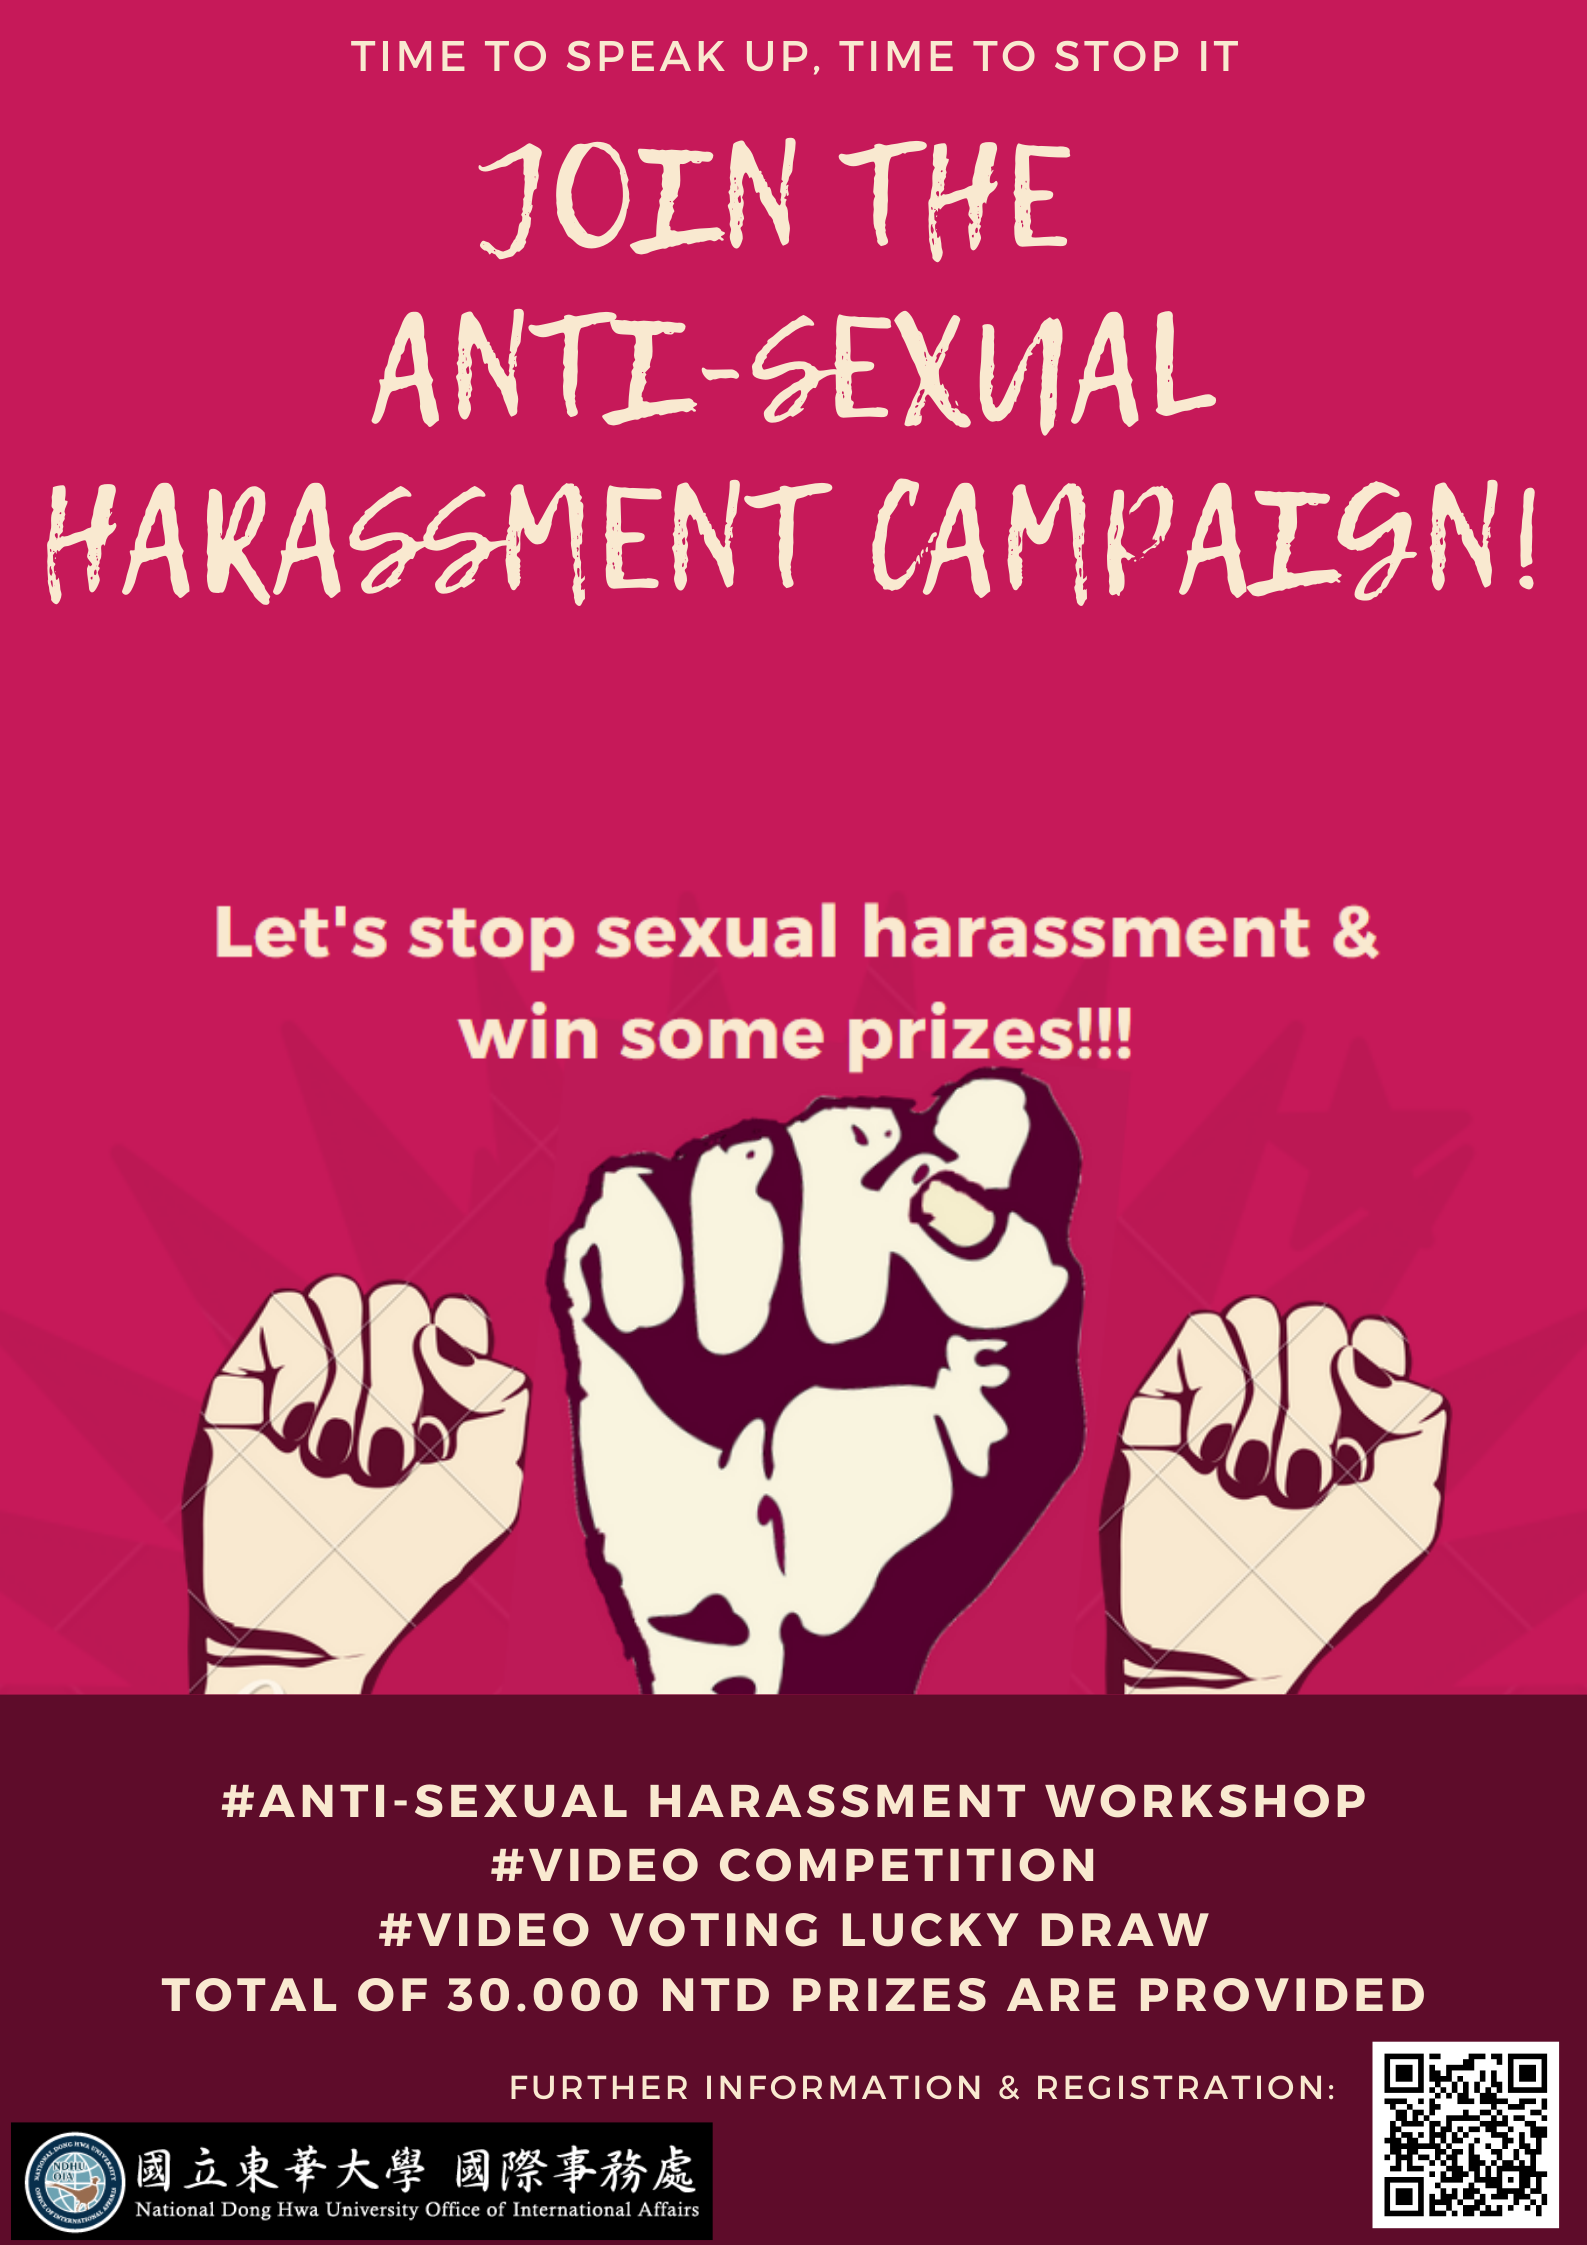 JOIN THE ANTI-SEXUAL HARASSMENT CAMPAIGN